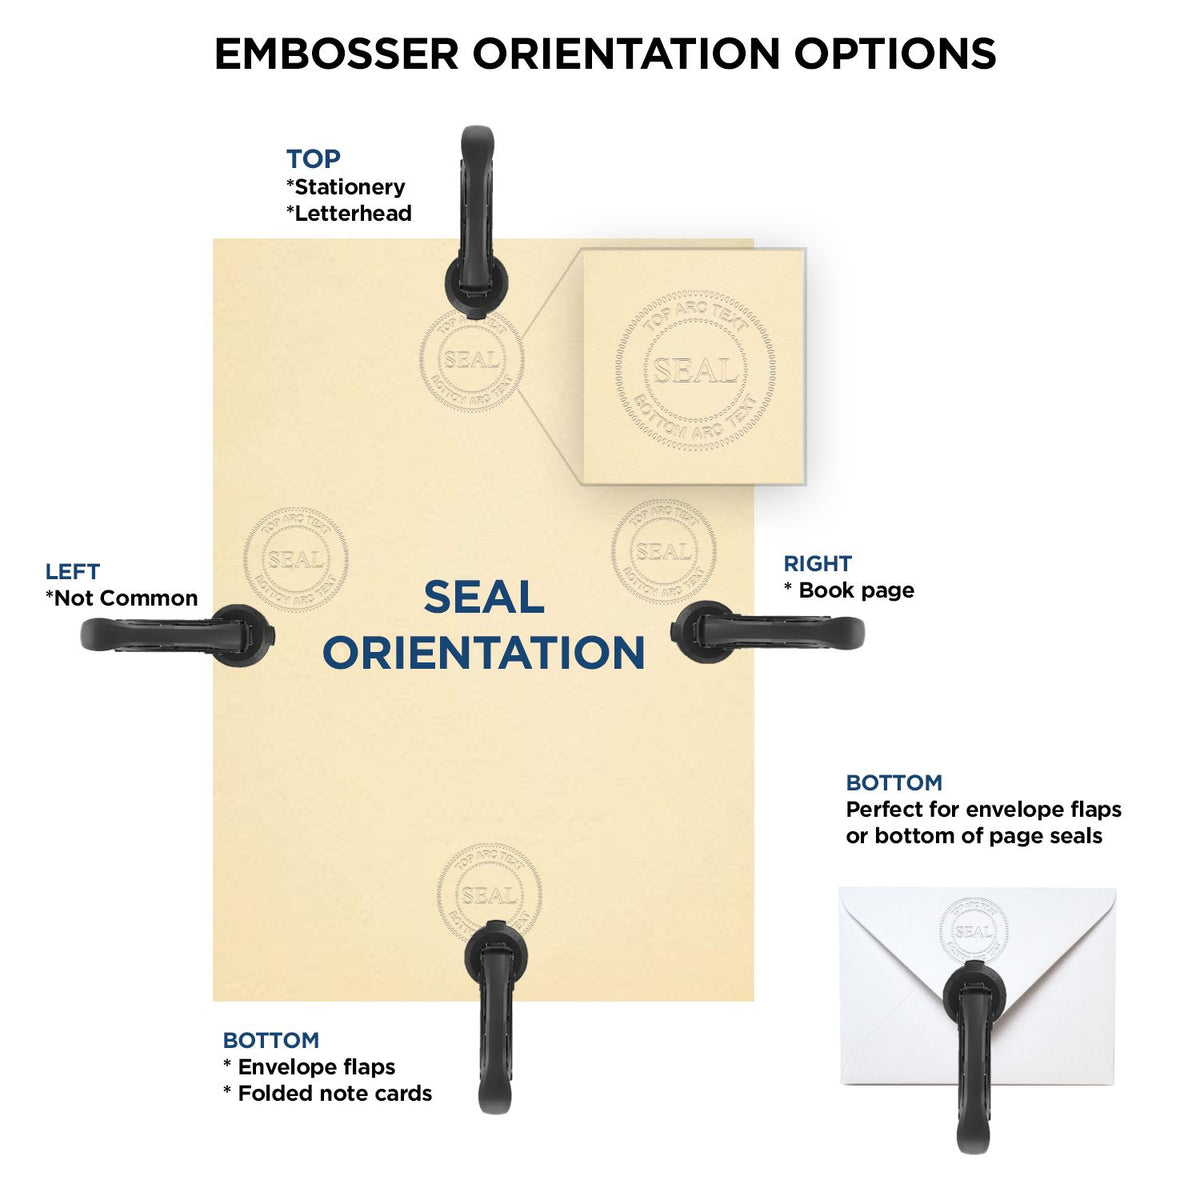 An infographic for the Hybrid Virginia Land Surveyor Seal showing embosser orientation, this is showing examples of a top, bottom, right and left insert.